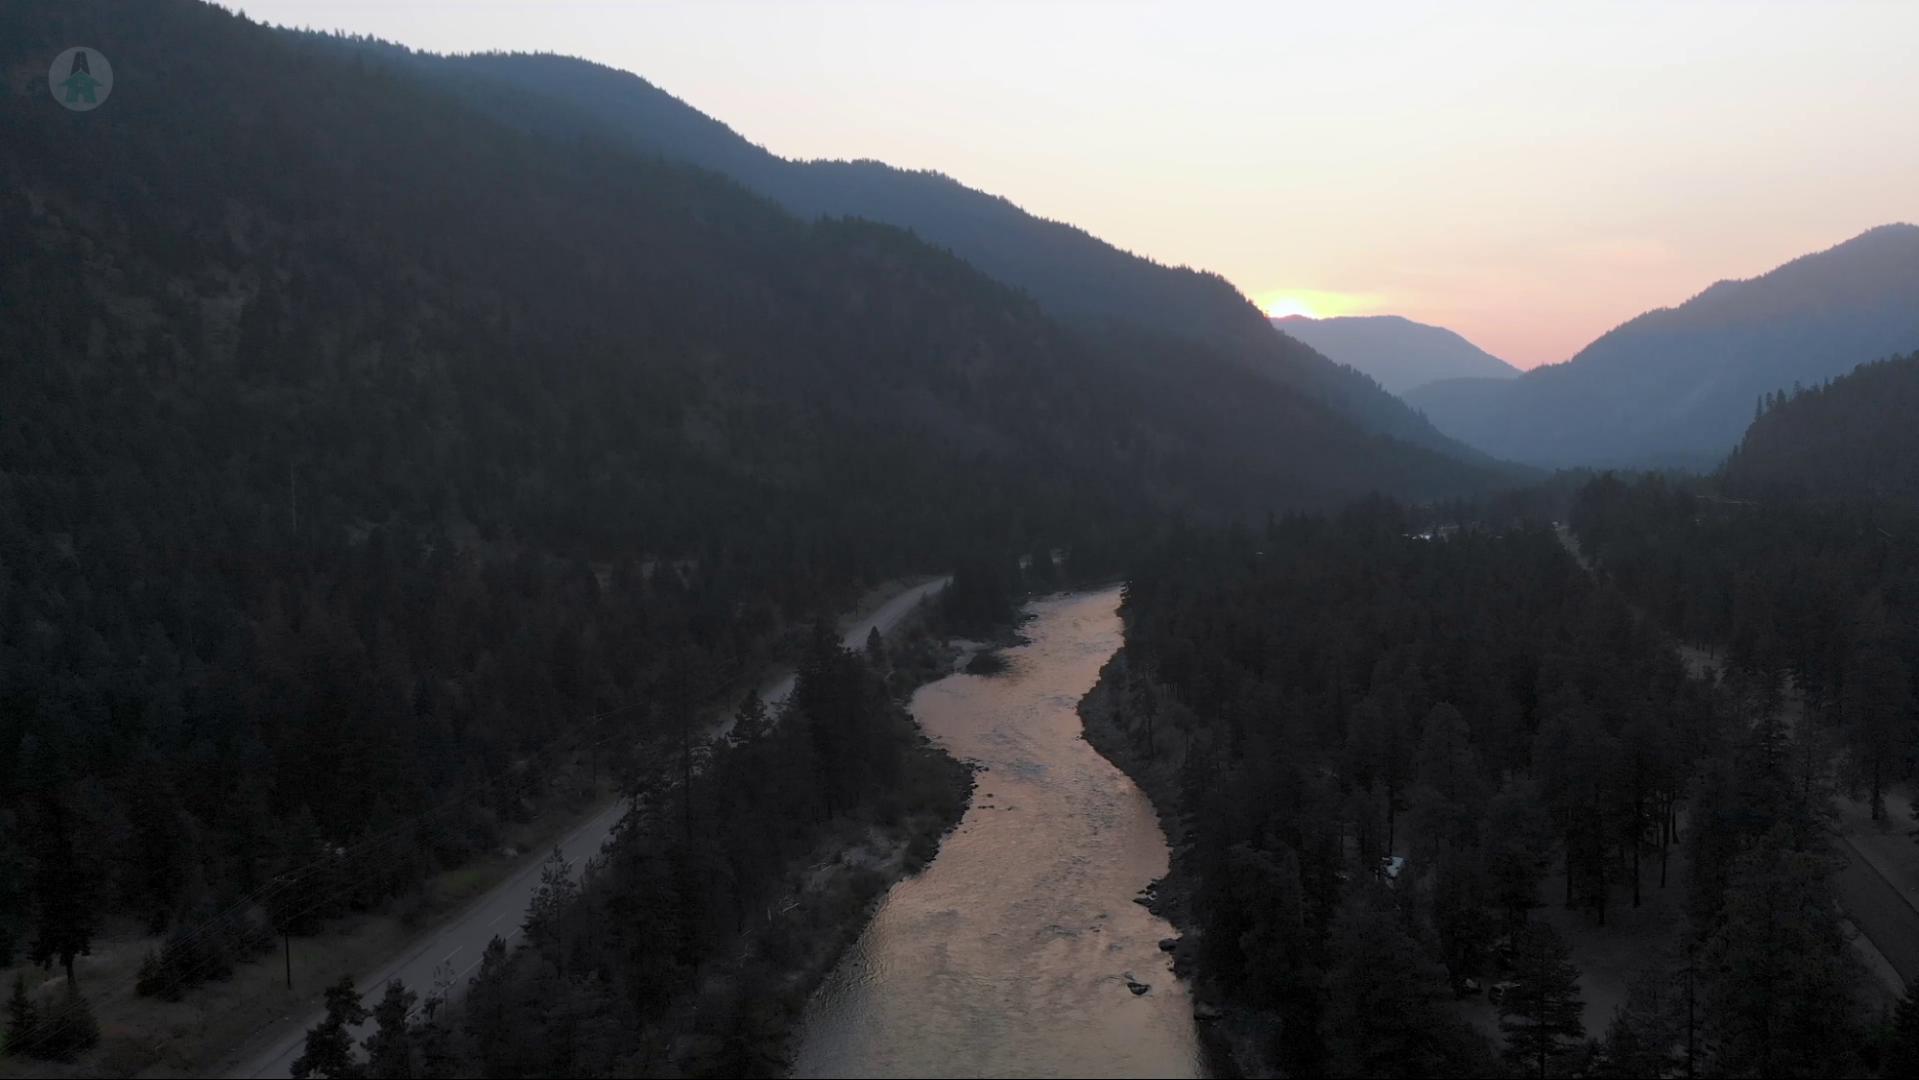 View of the Similkameen River running through the valley of the same name. This valley is found in the Okanagan region of British Columbia, Canada.